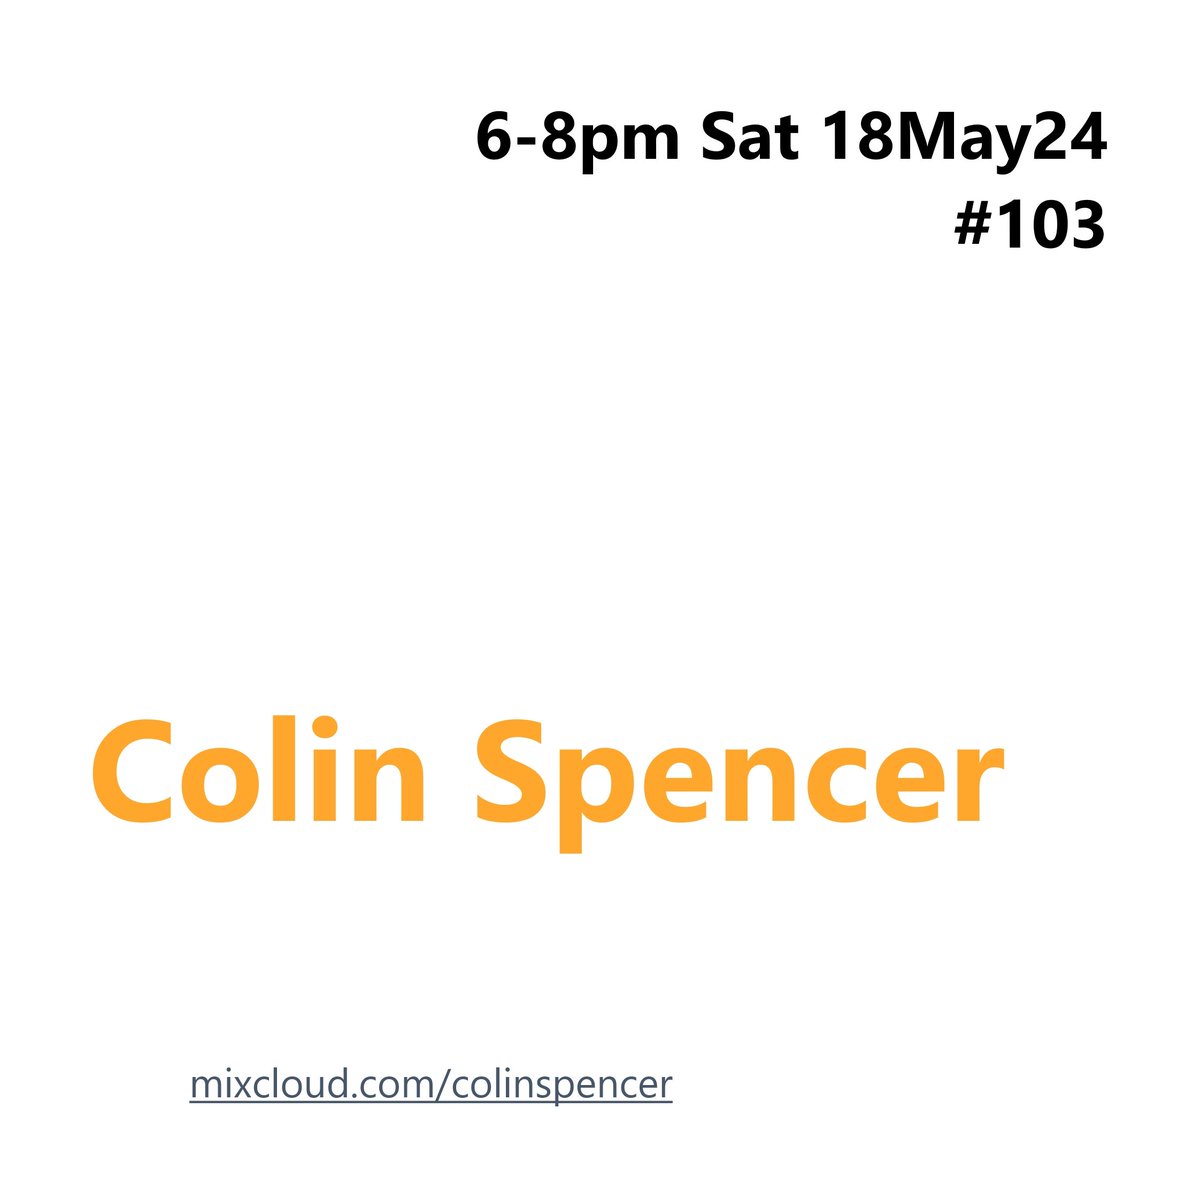 Artists with #NewMusic during #ColinSpencer Programme #103 include #FireSign : #Masal Remix 🔊mixcloud.com/colinspencer/🎧 Saturday 18 May 2024 6-8pm (#UK times) #DiscoverAndRemember @Fire_Sign__ Before then? Audio treasures also throughout catch-up #095 ▶️mixcloud.com/ColinSpencer/c…